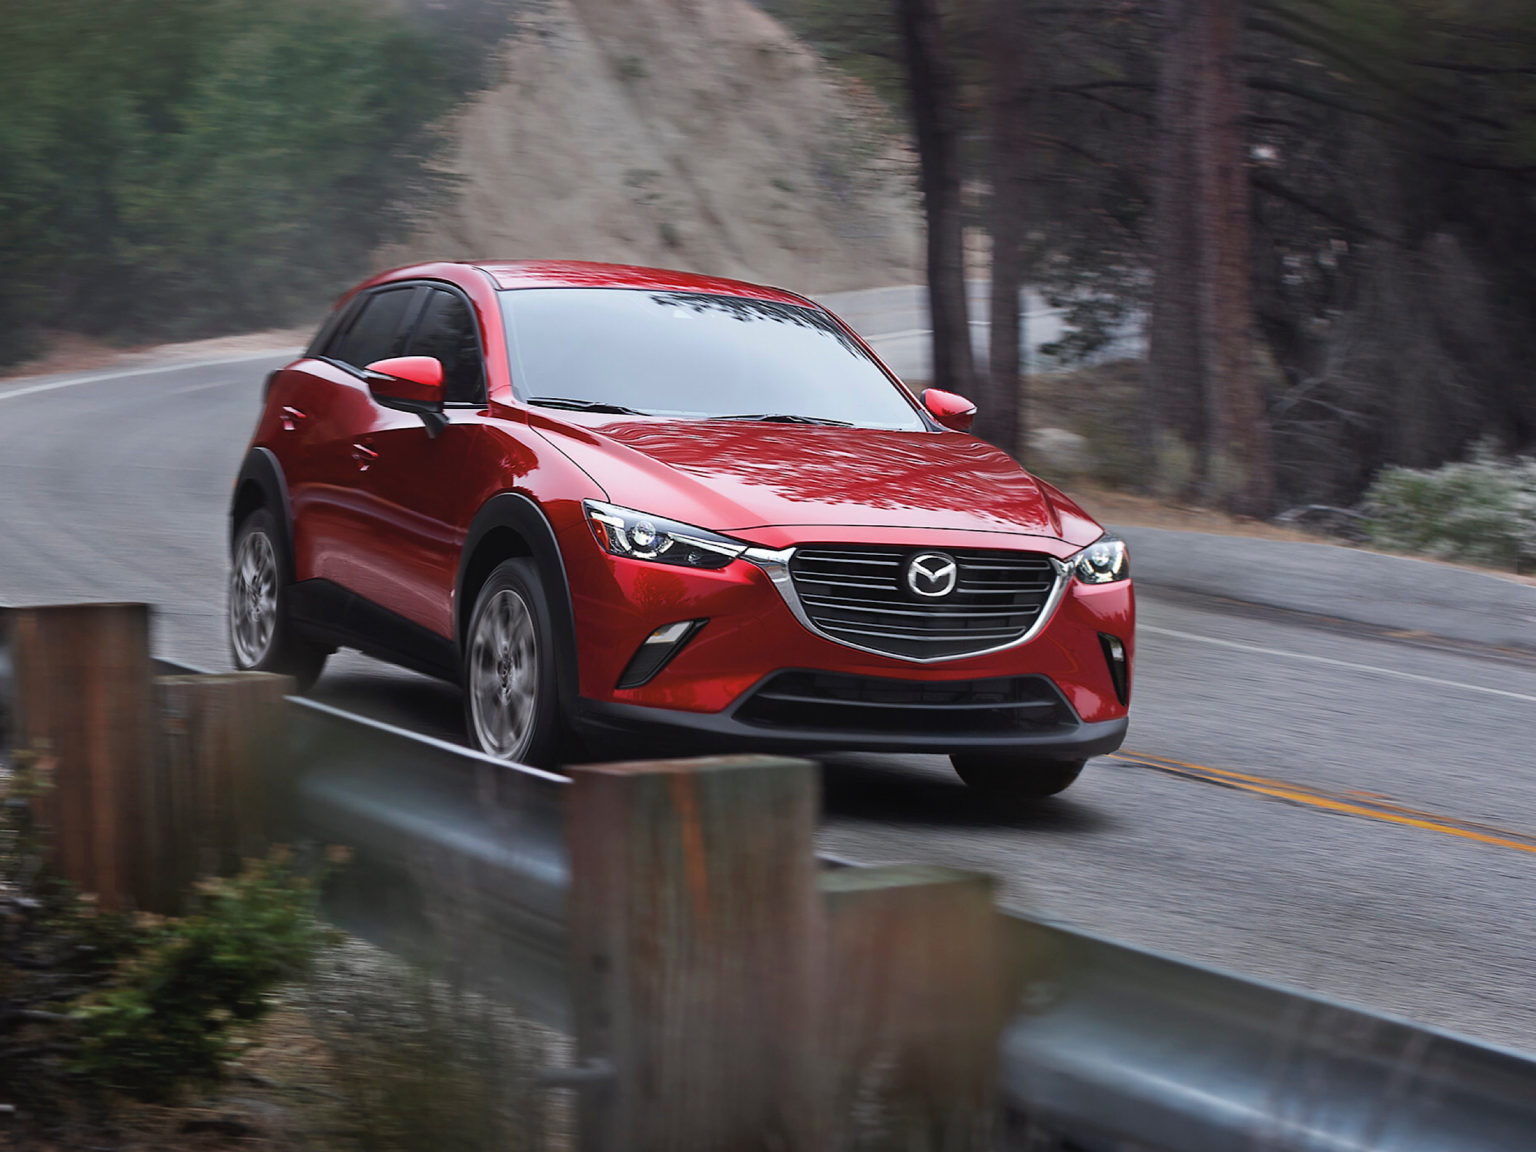 The Mazda CX-3 remains mostly unchanged for the 2021 model year